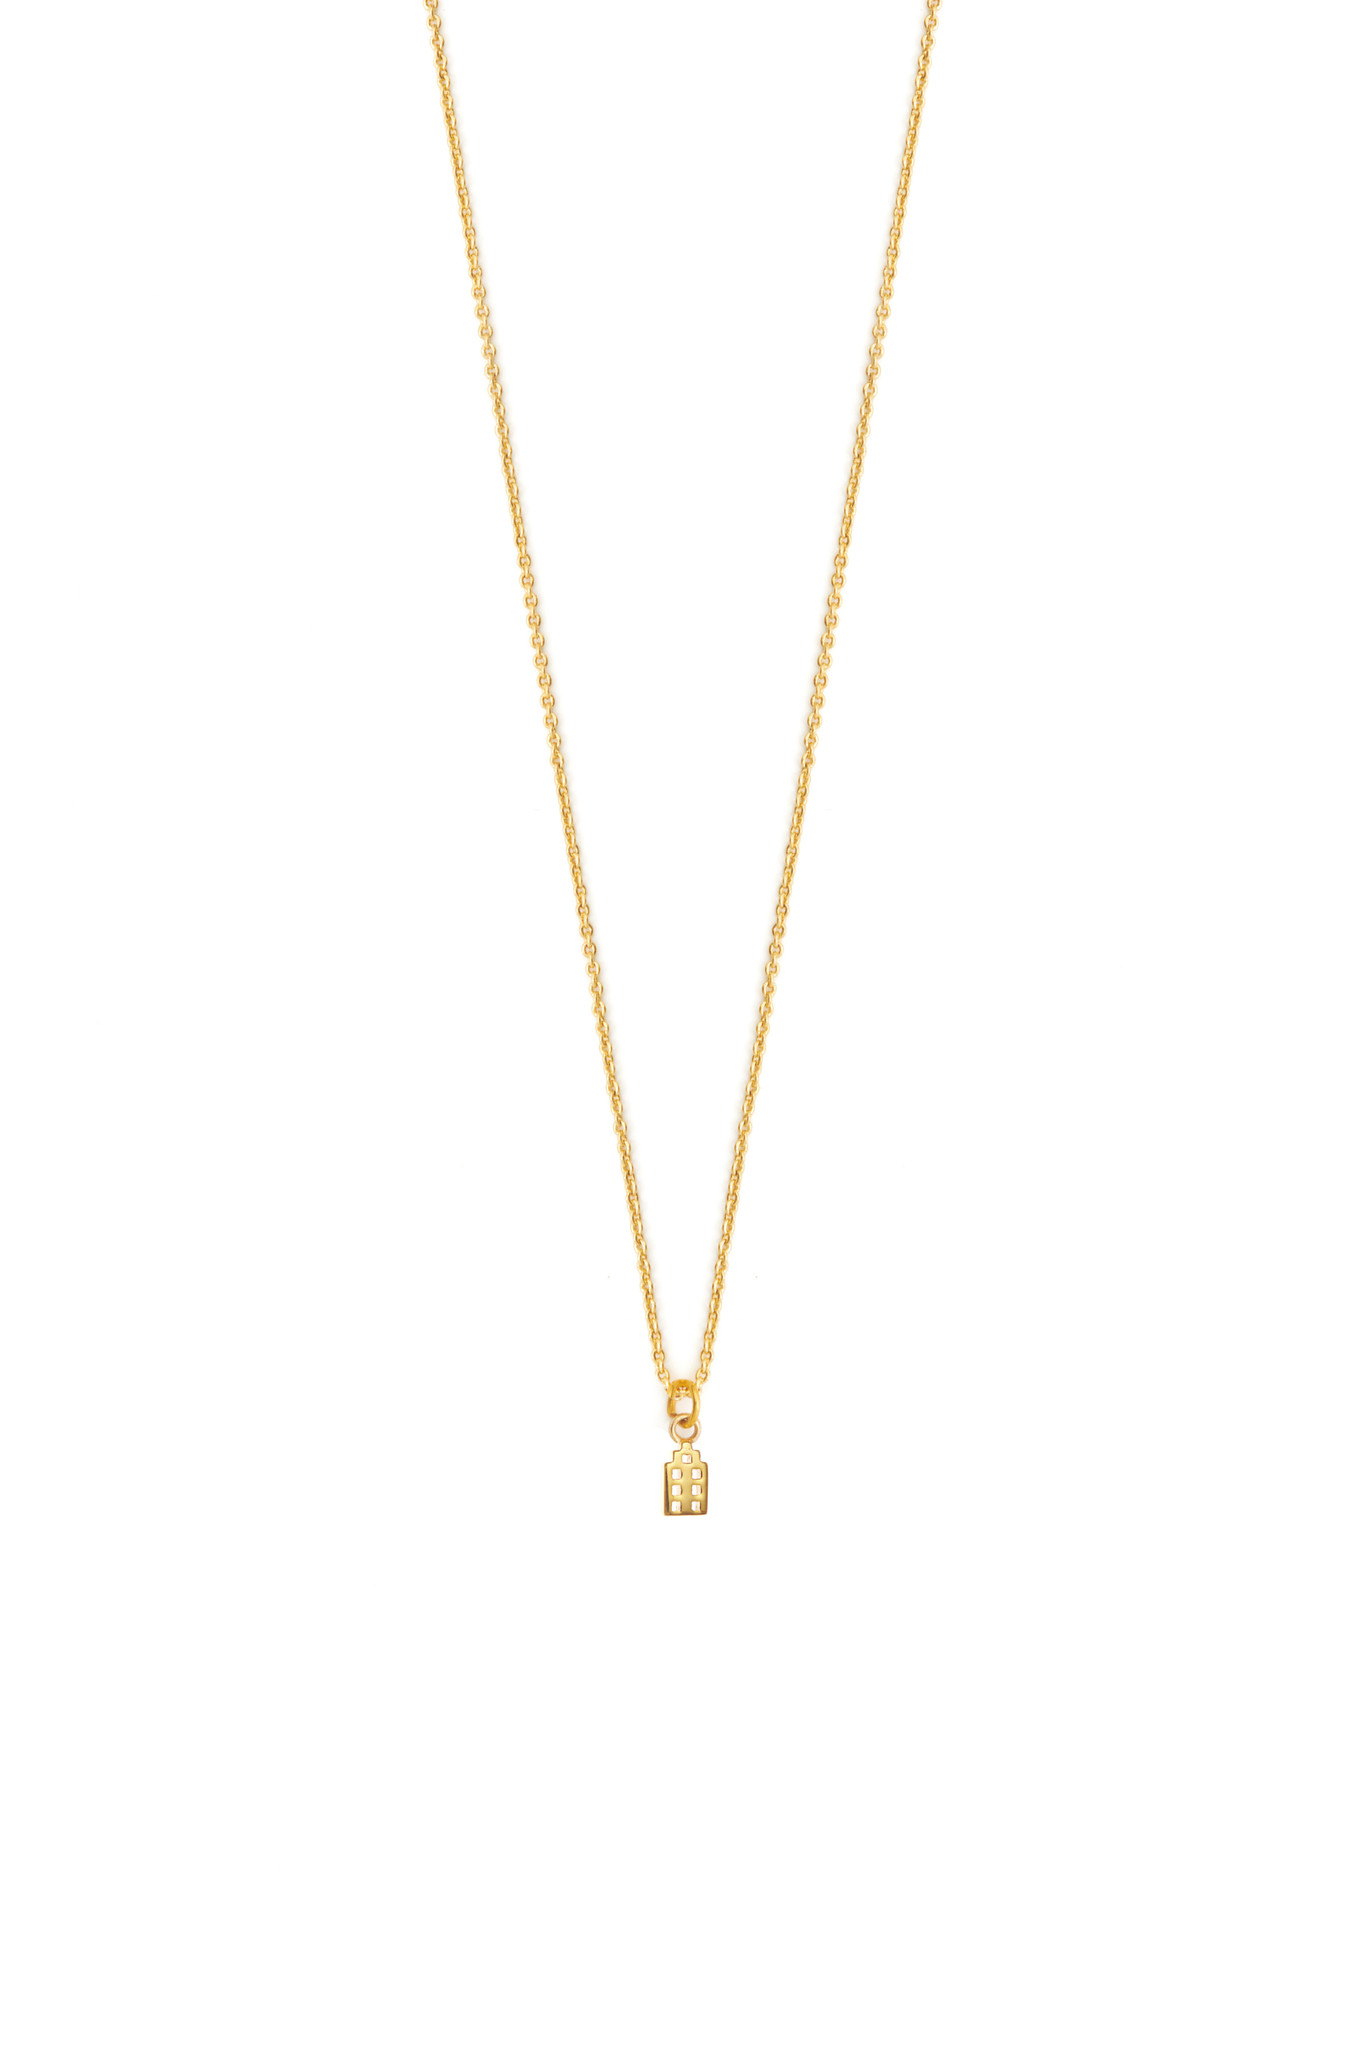 The Jordaan Necklace Gold Plated